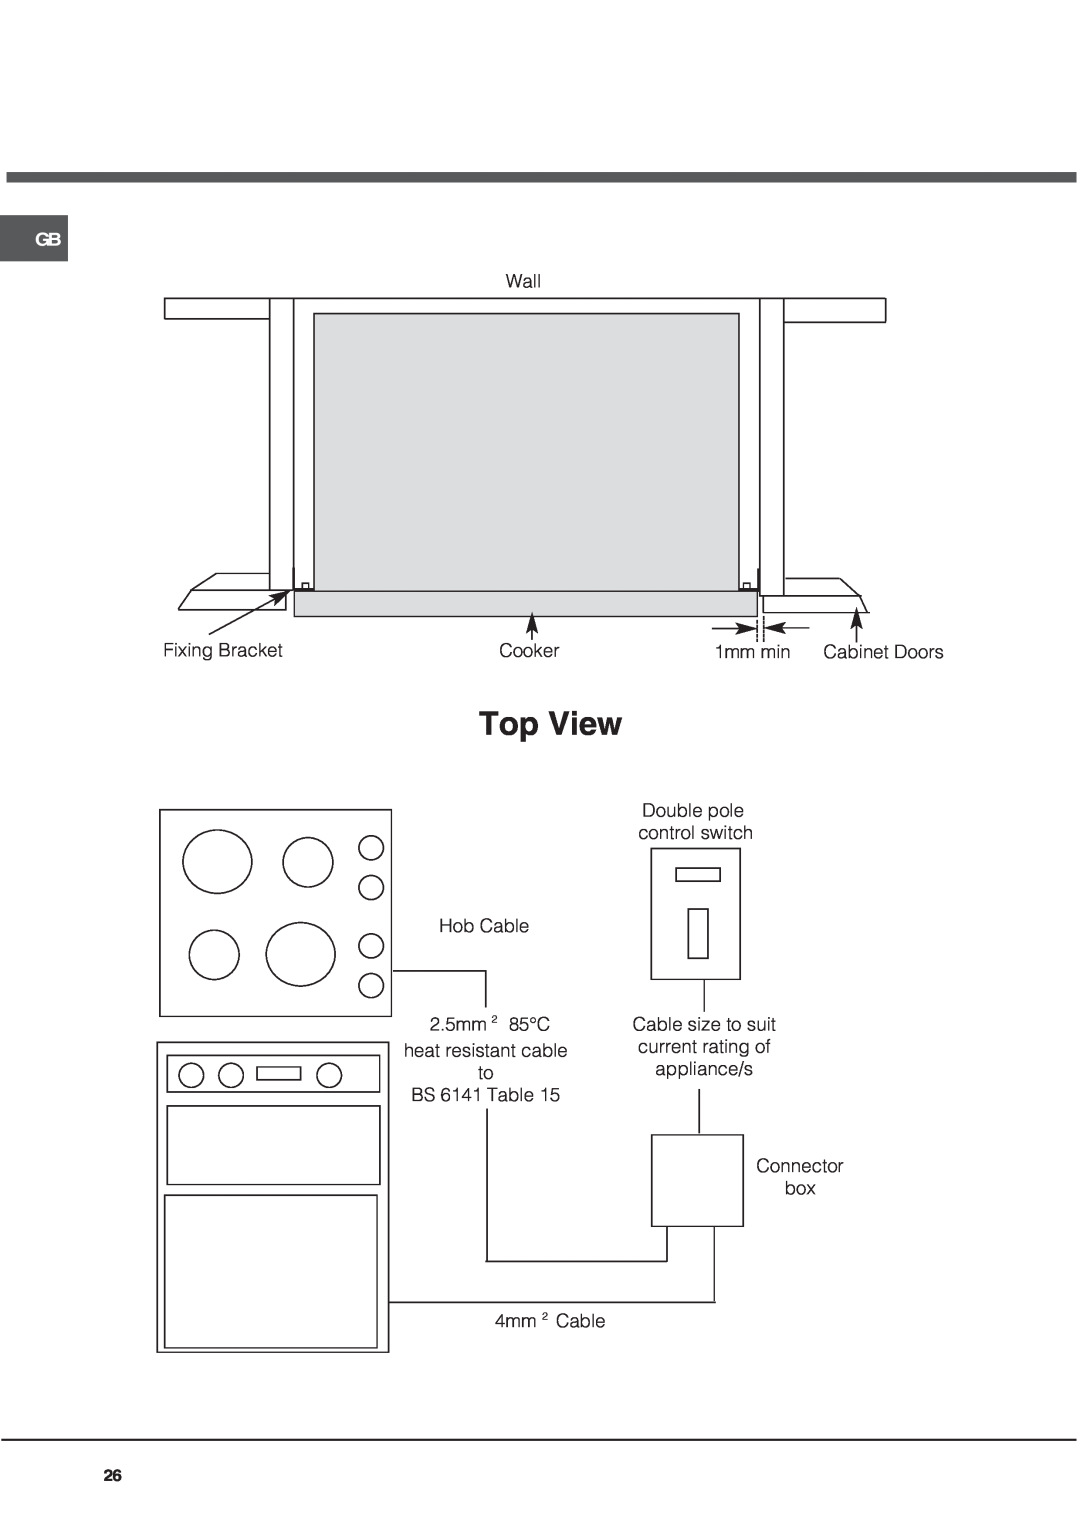 Hotpoint UQ891 manual Top View, Wall, Fixing Bracket, Cooker, 1mm min, Hob Cable, 2.5mm 2 85C, appliance/s, BS 6141 Table 